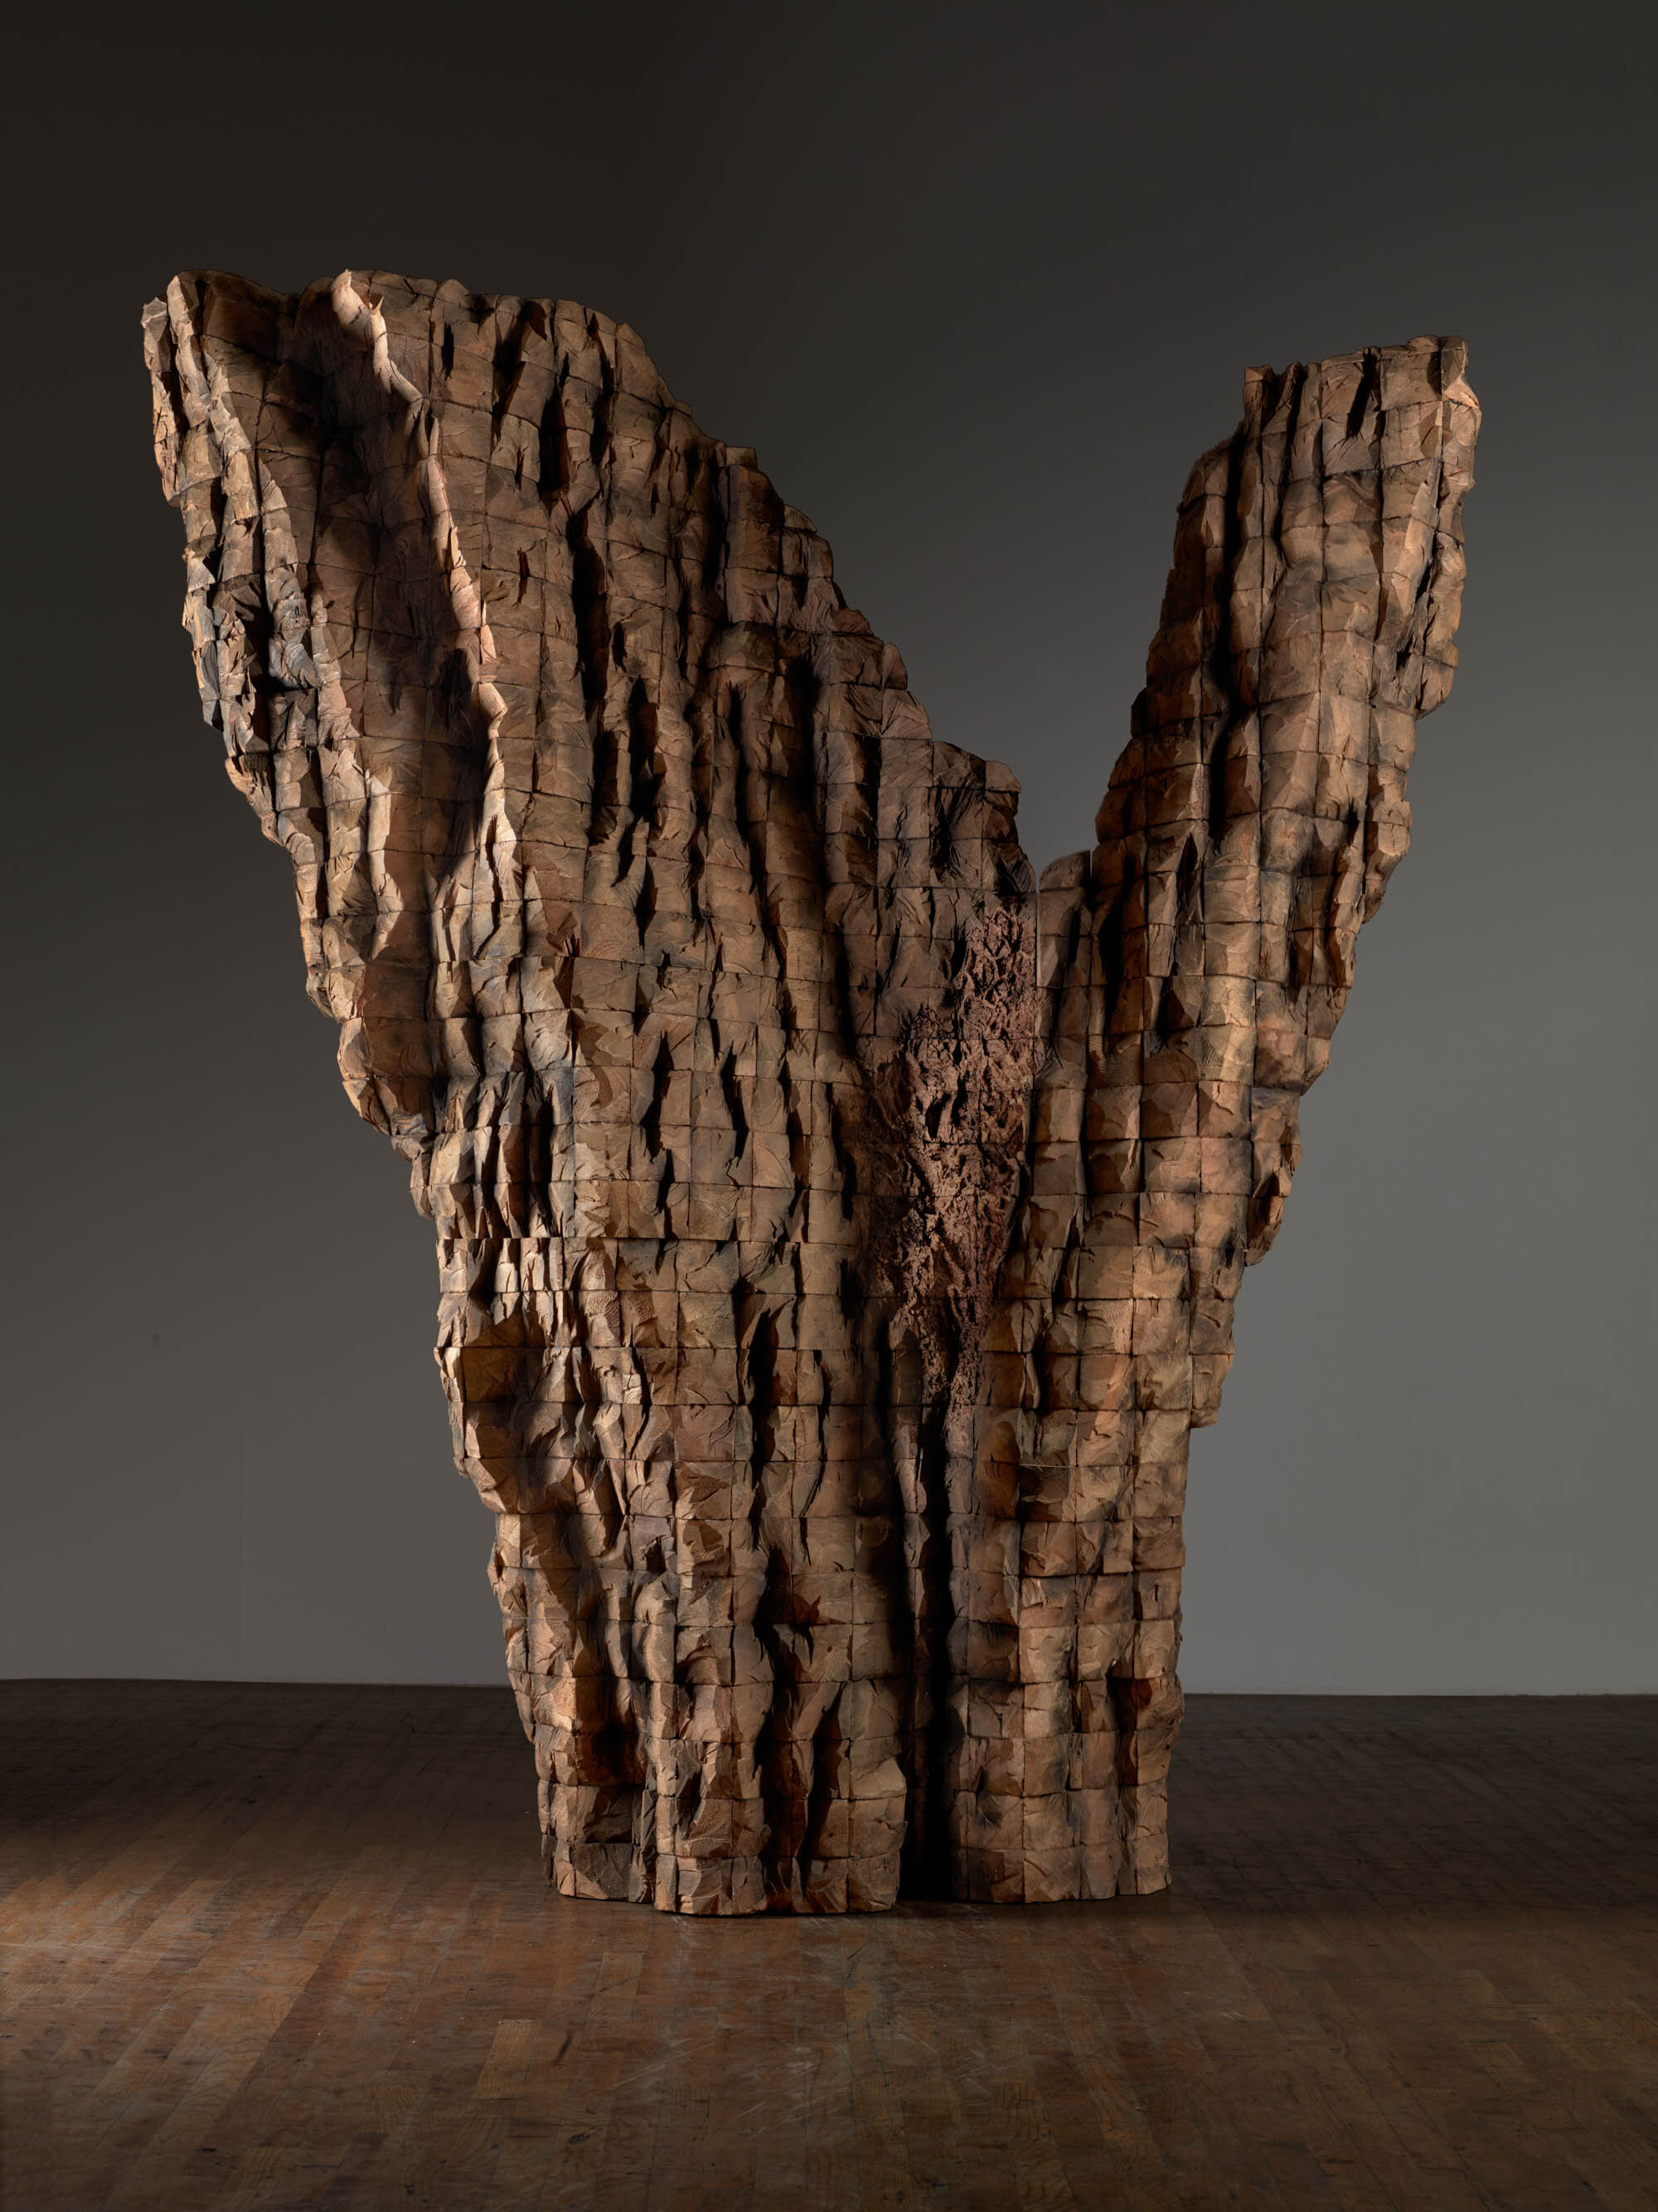       "V" STOP , 2015 Cedar and graphite 103 x 87 x 40 in.    MORE IMAGES  